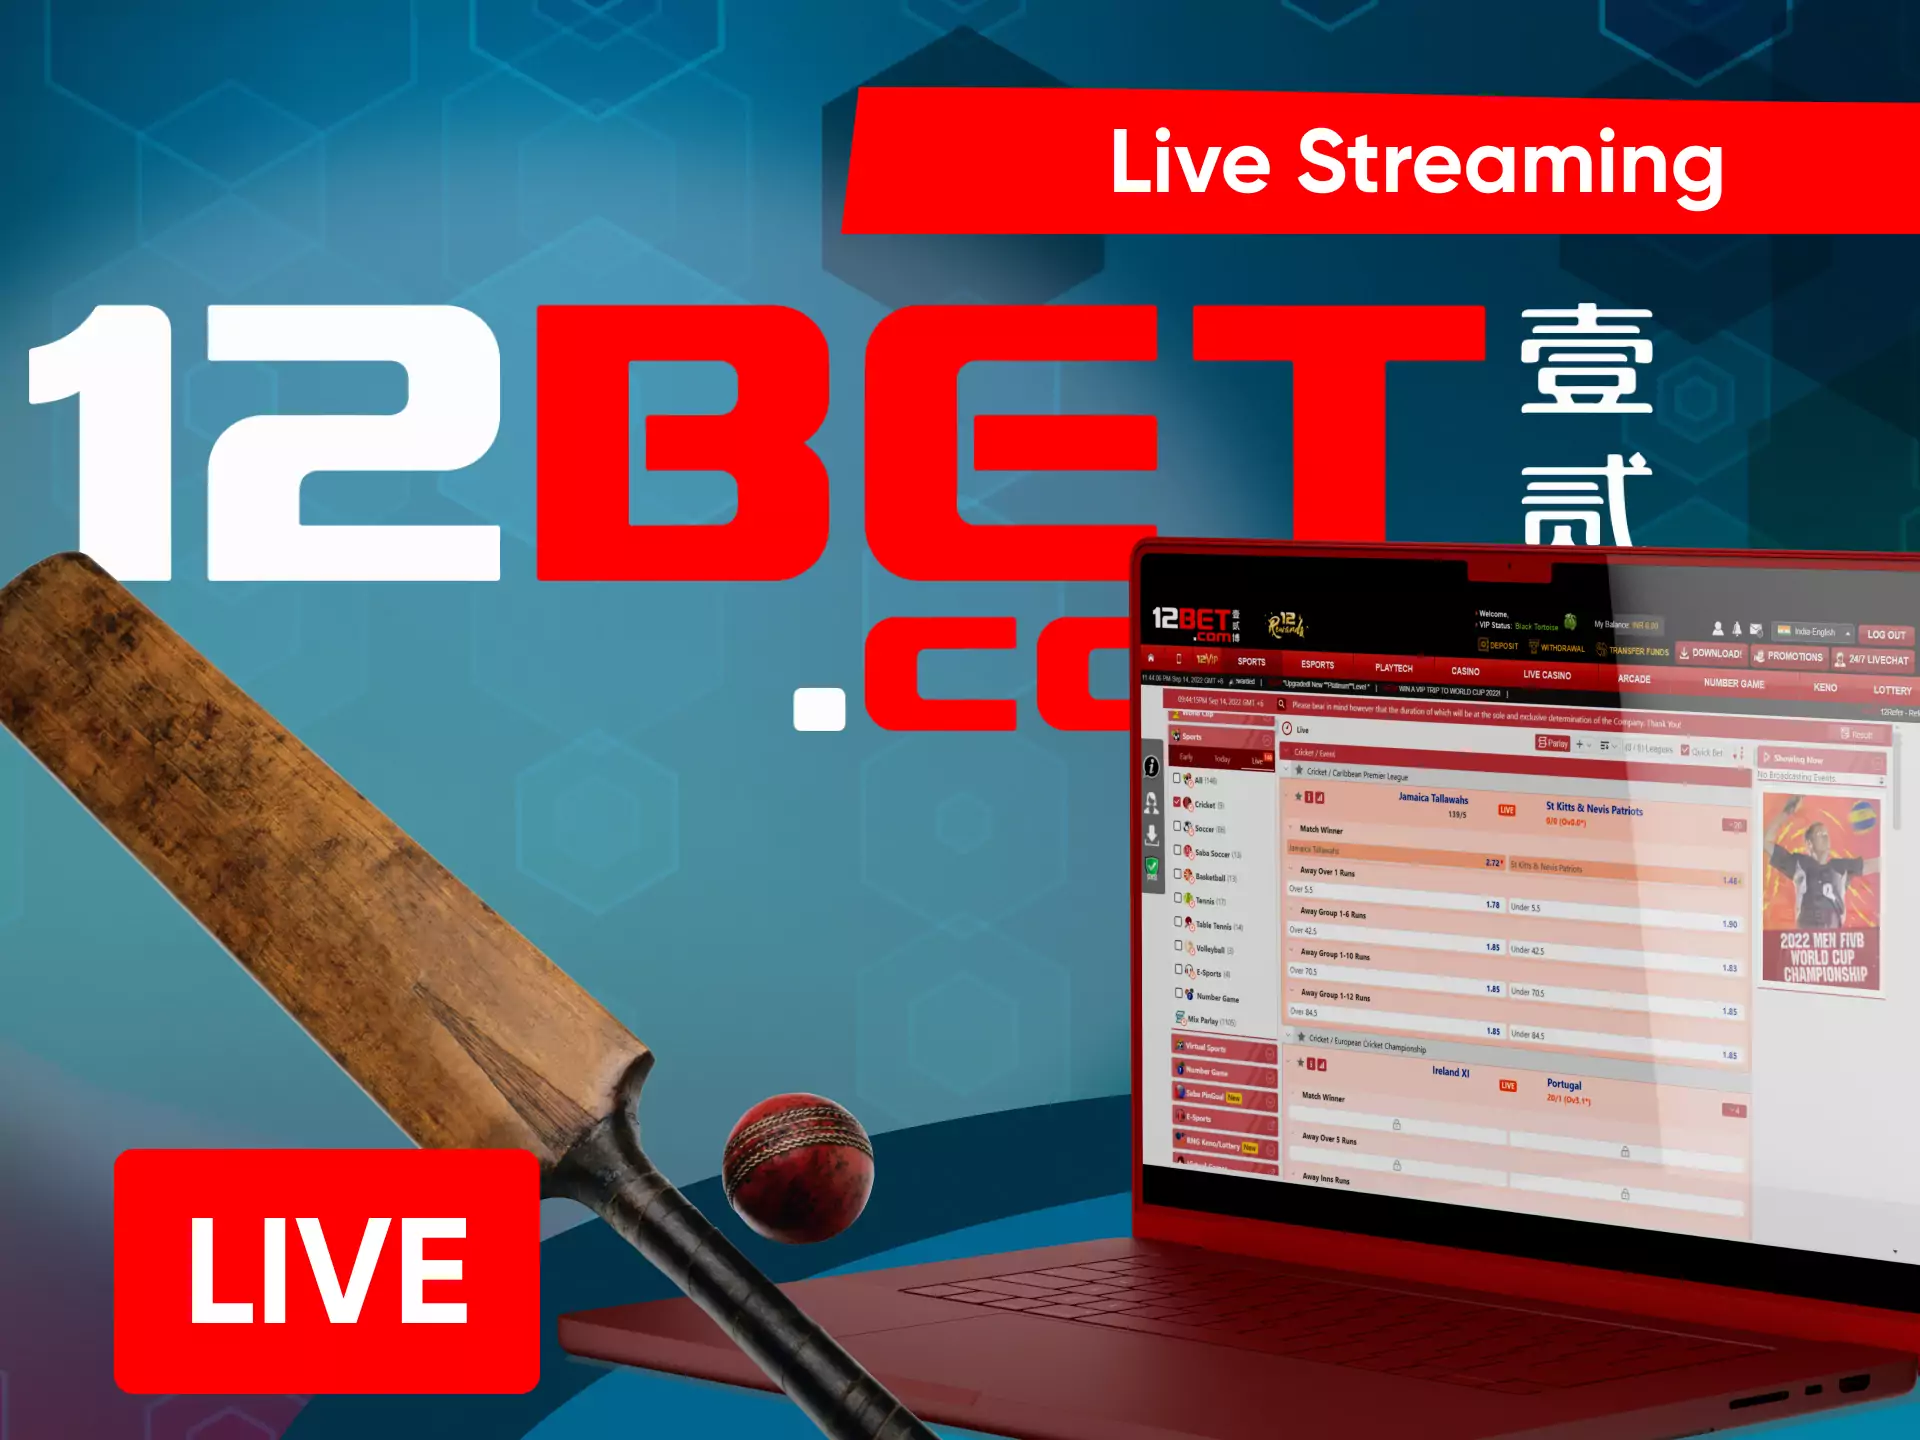 On 12bet, you can follow matches live.